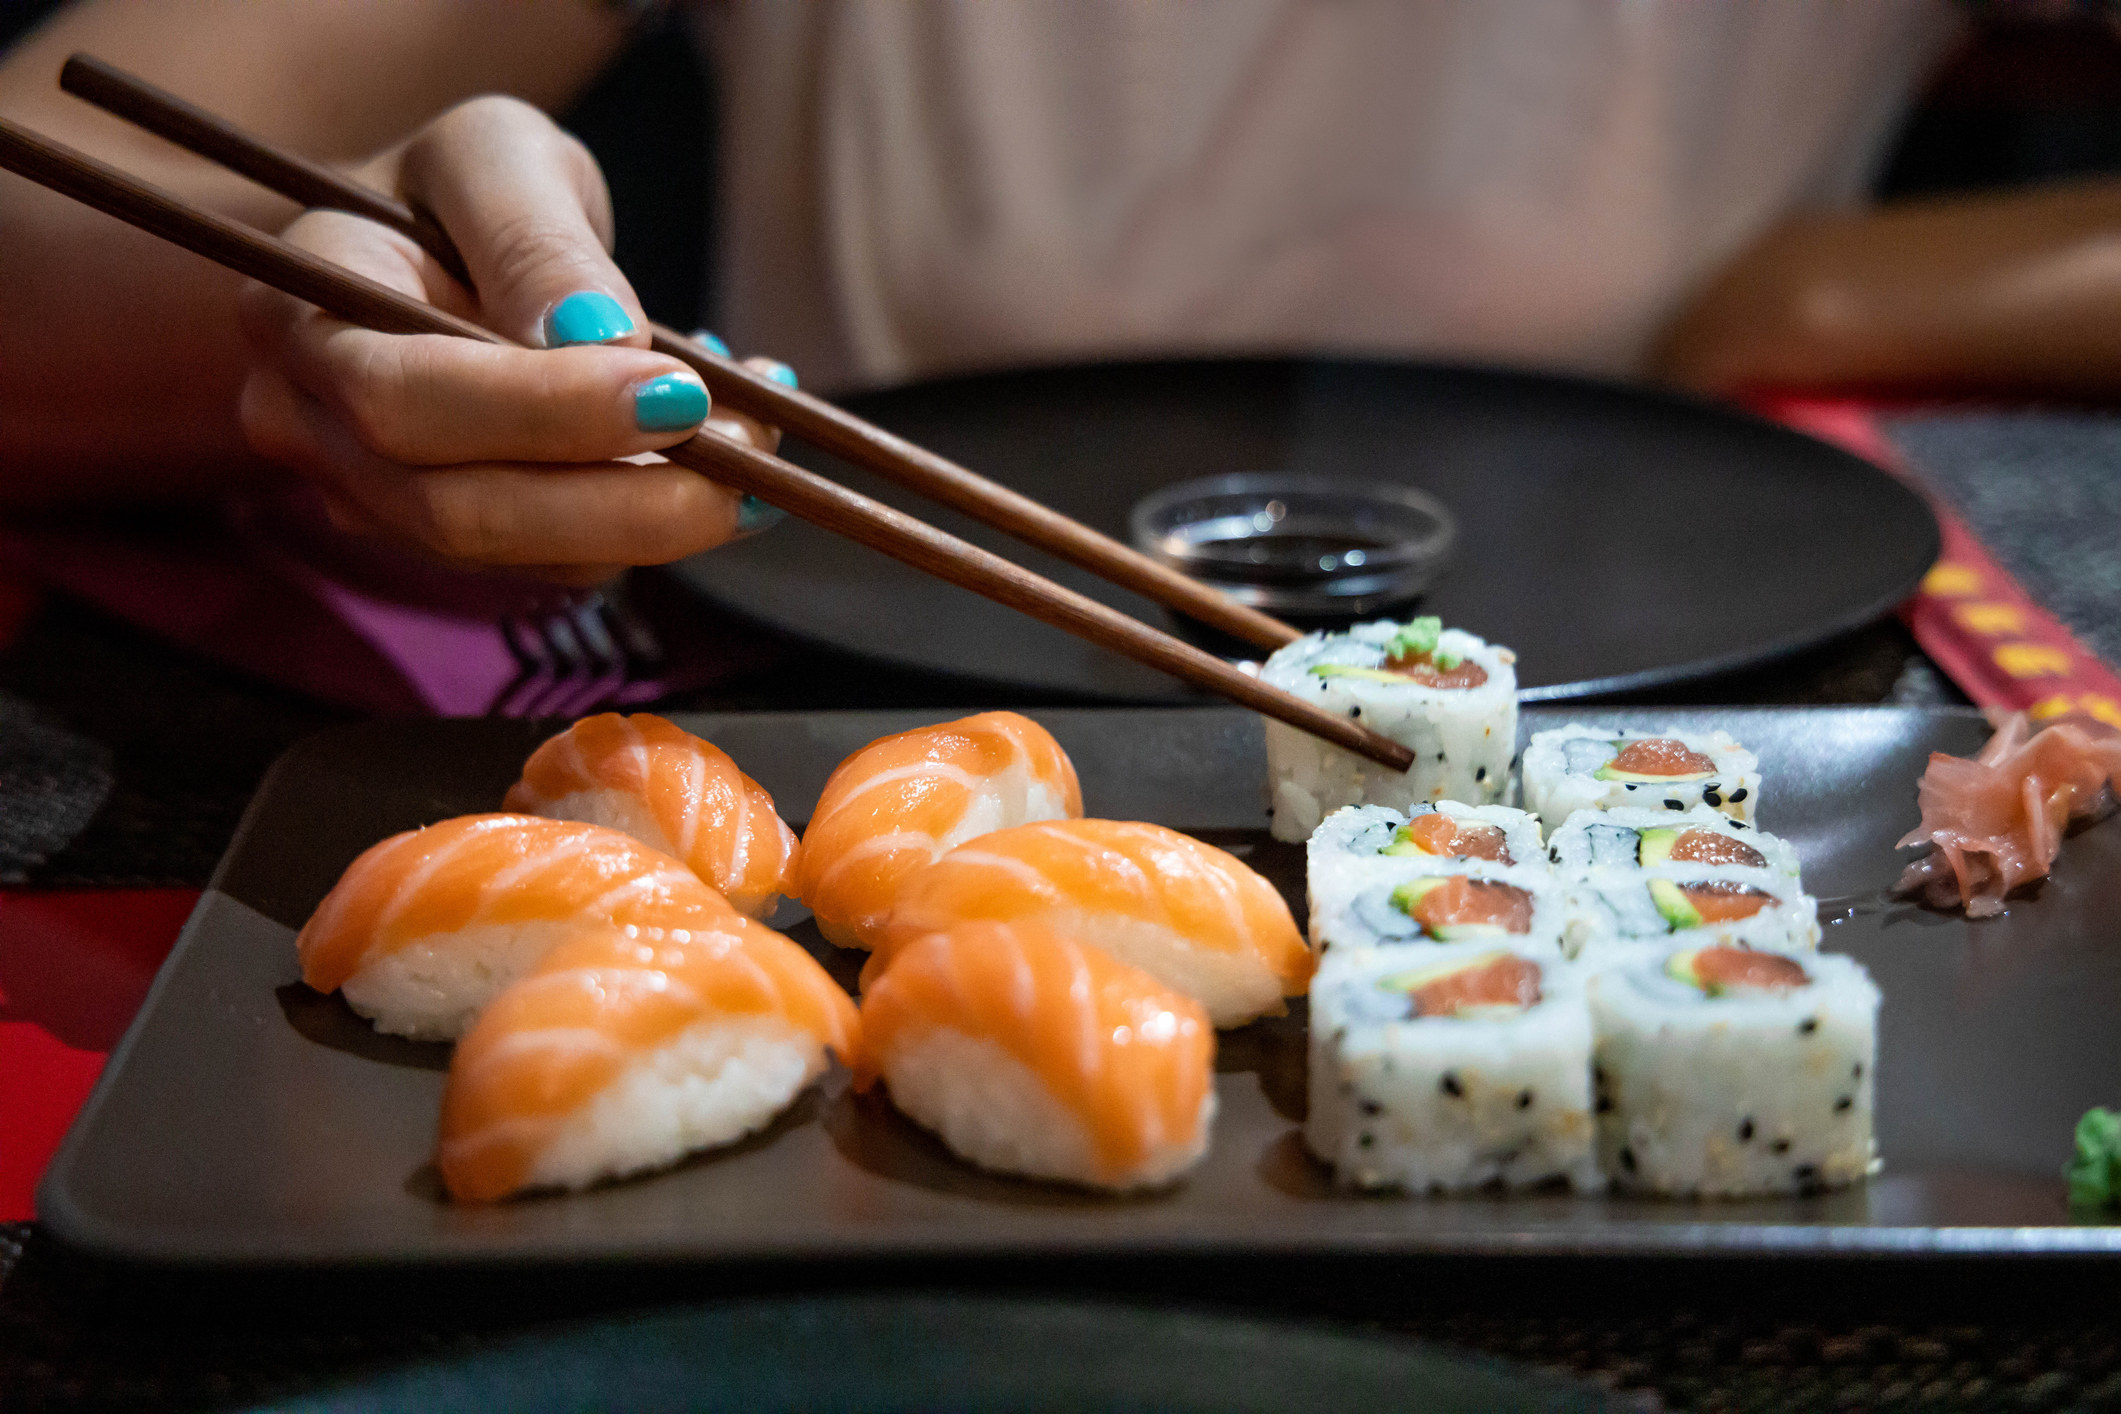 A person eating sushi with chopsticks